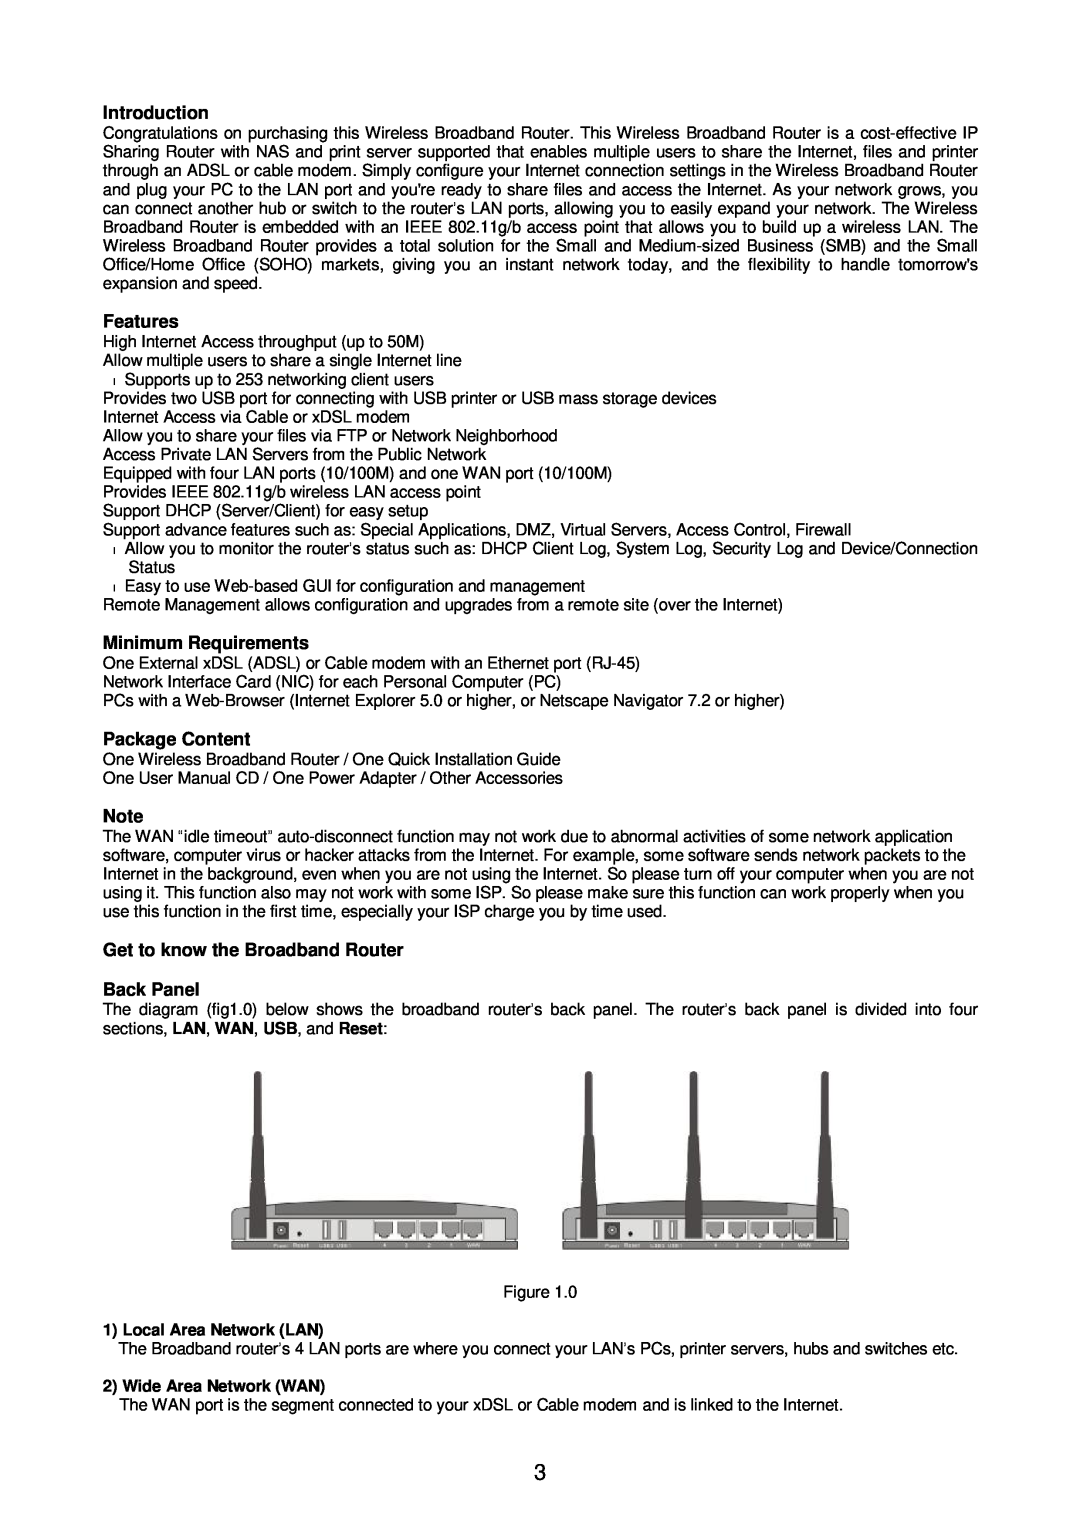 Edimax Technology Broadband Router Introduction, Features, Minimum Requirements, Package Content, Local Area Network LAN 